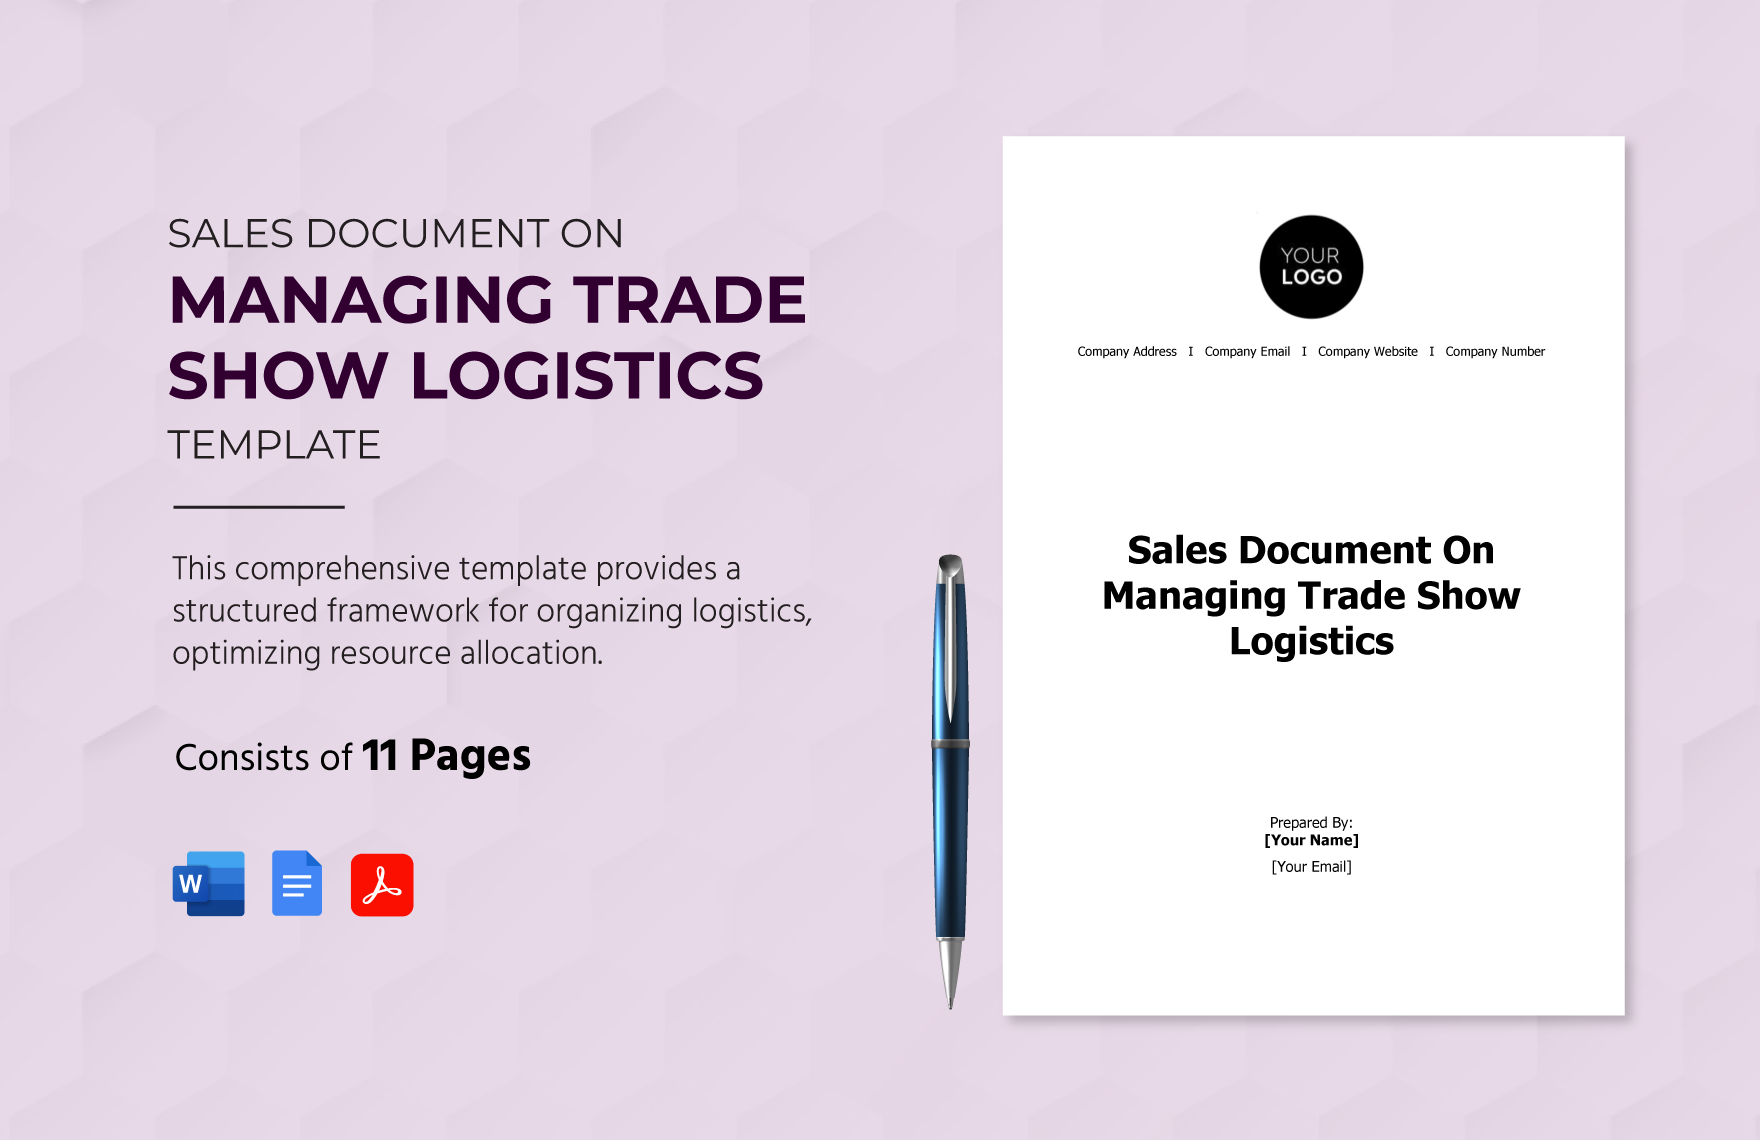 Sales Document on Managing Trade Show Logistics Template